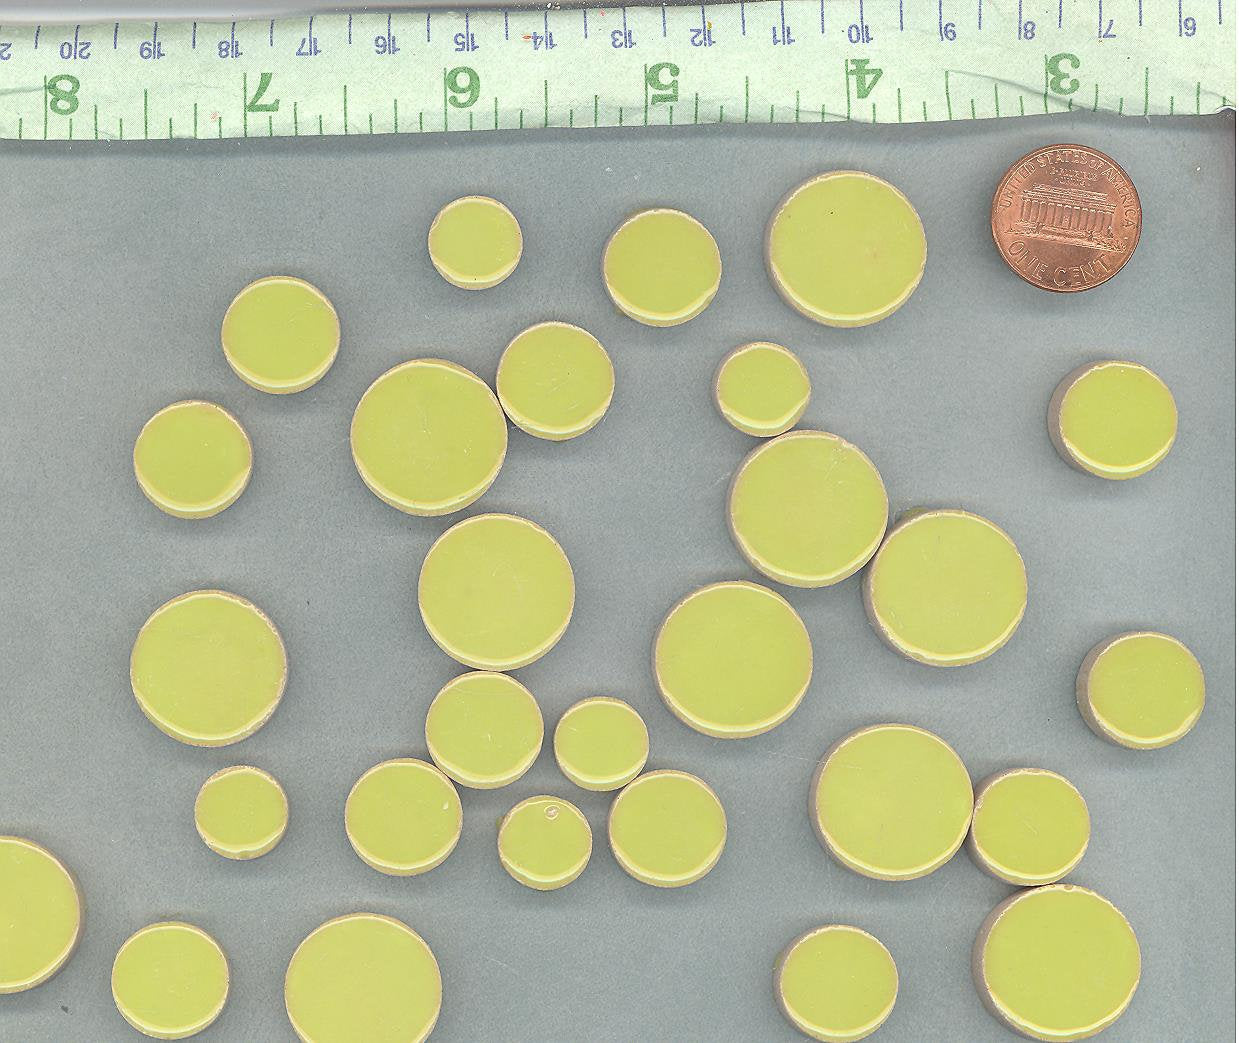 Kiwi Green Circles Mosaic Tiles - 50g Ceramic in Mix of 3 Sizes 1/2" and 3/4" and 5/8"